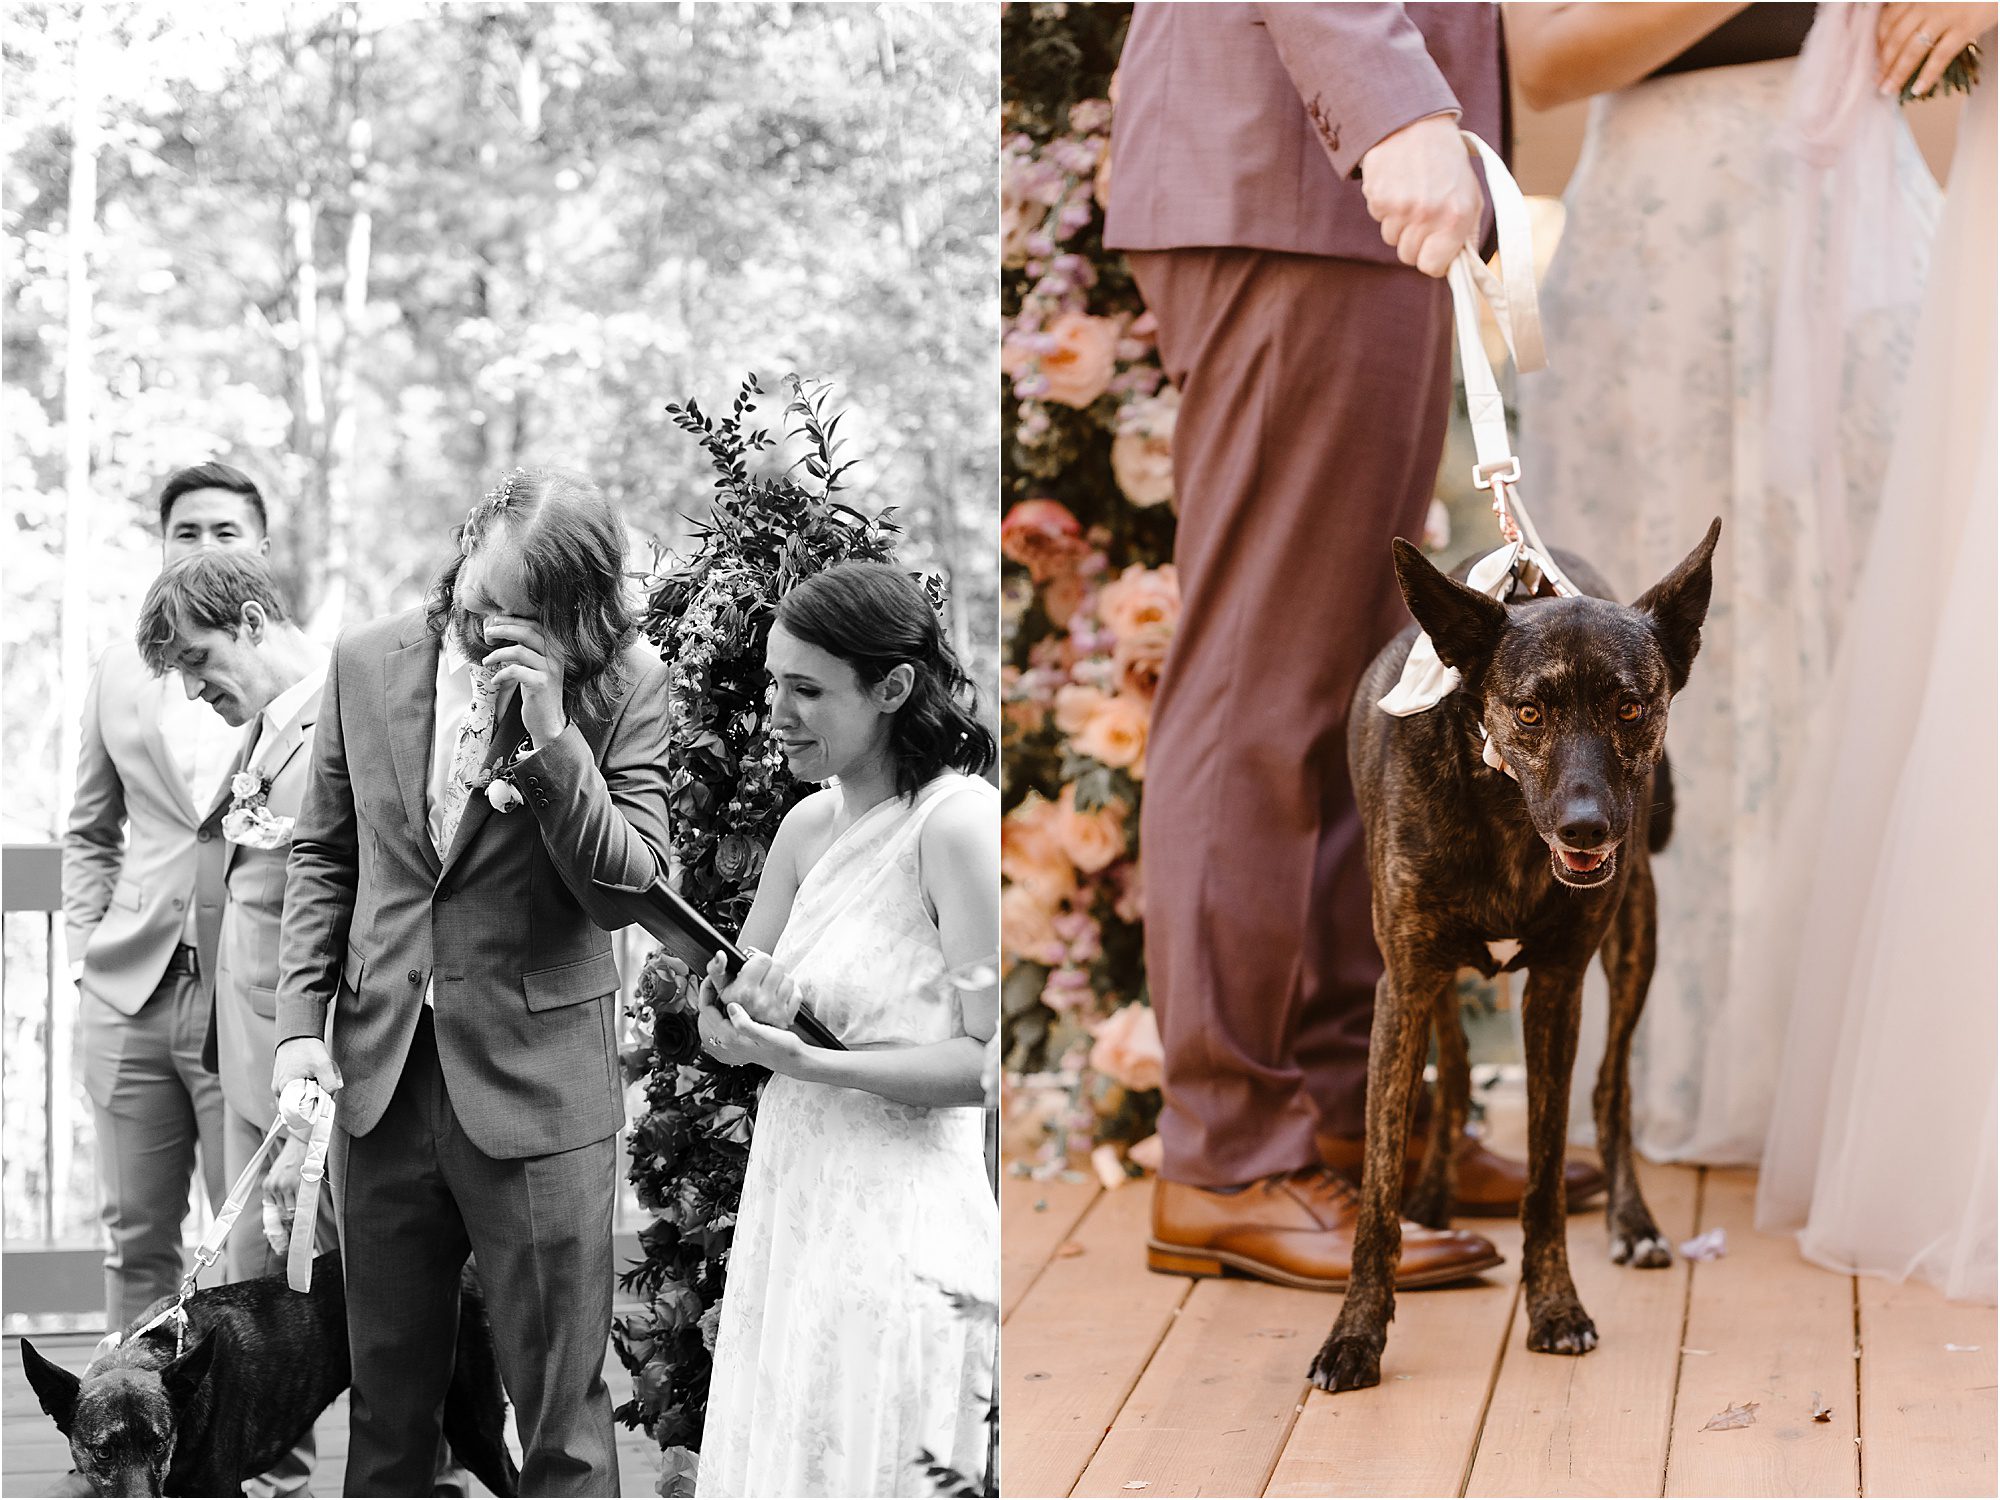 groom cries while watching bride walk down aisle at wedding while holding black dog on leash